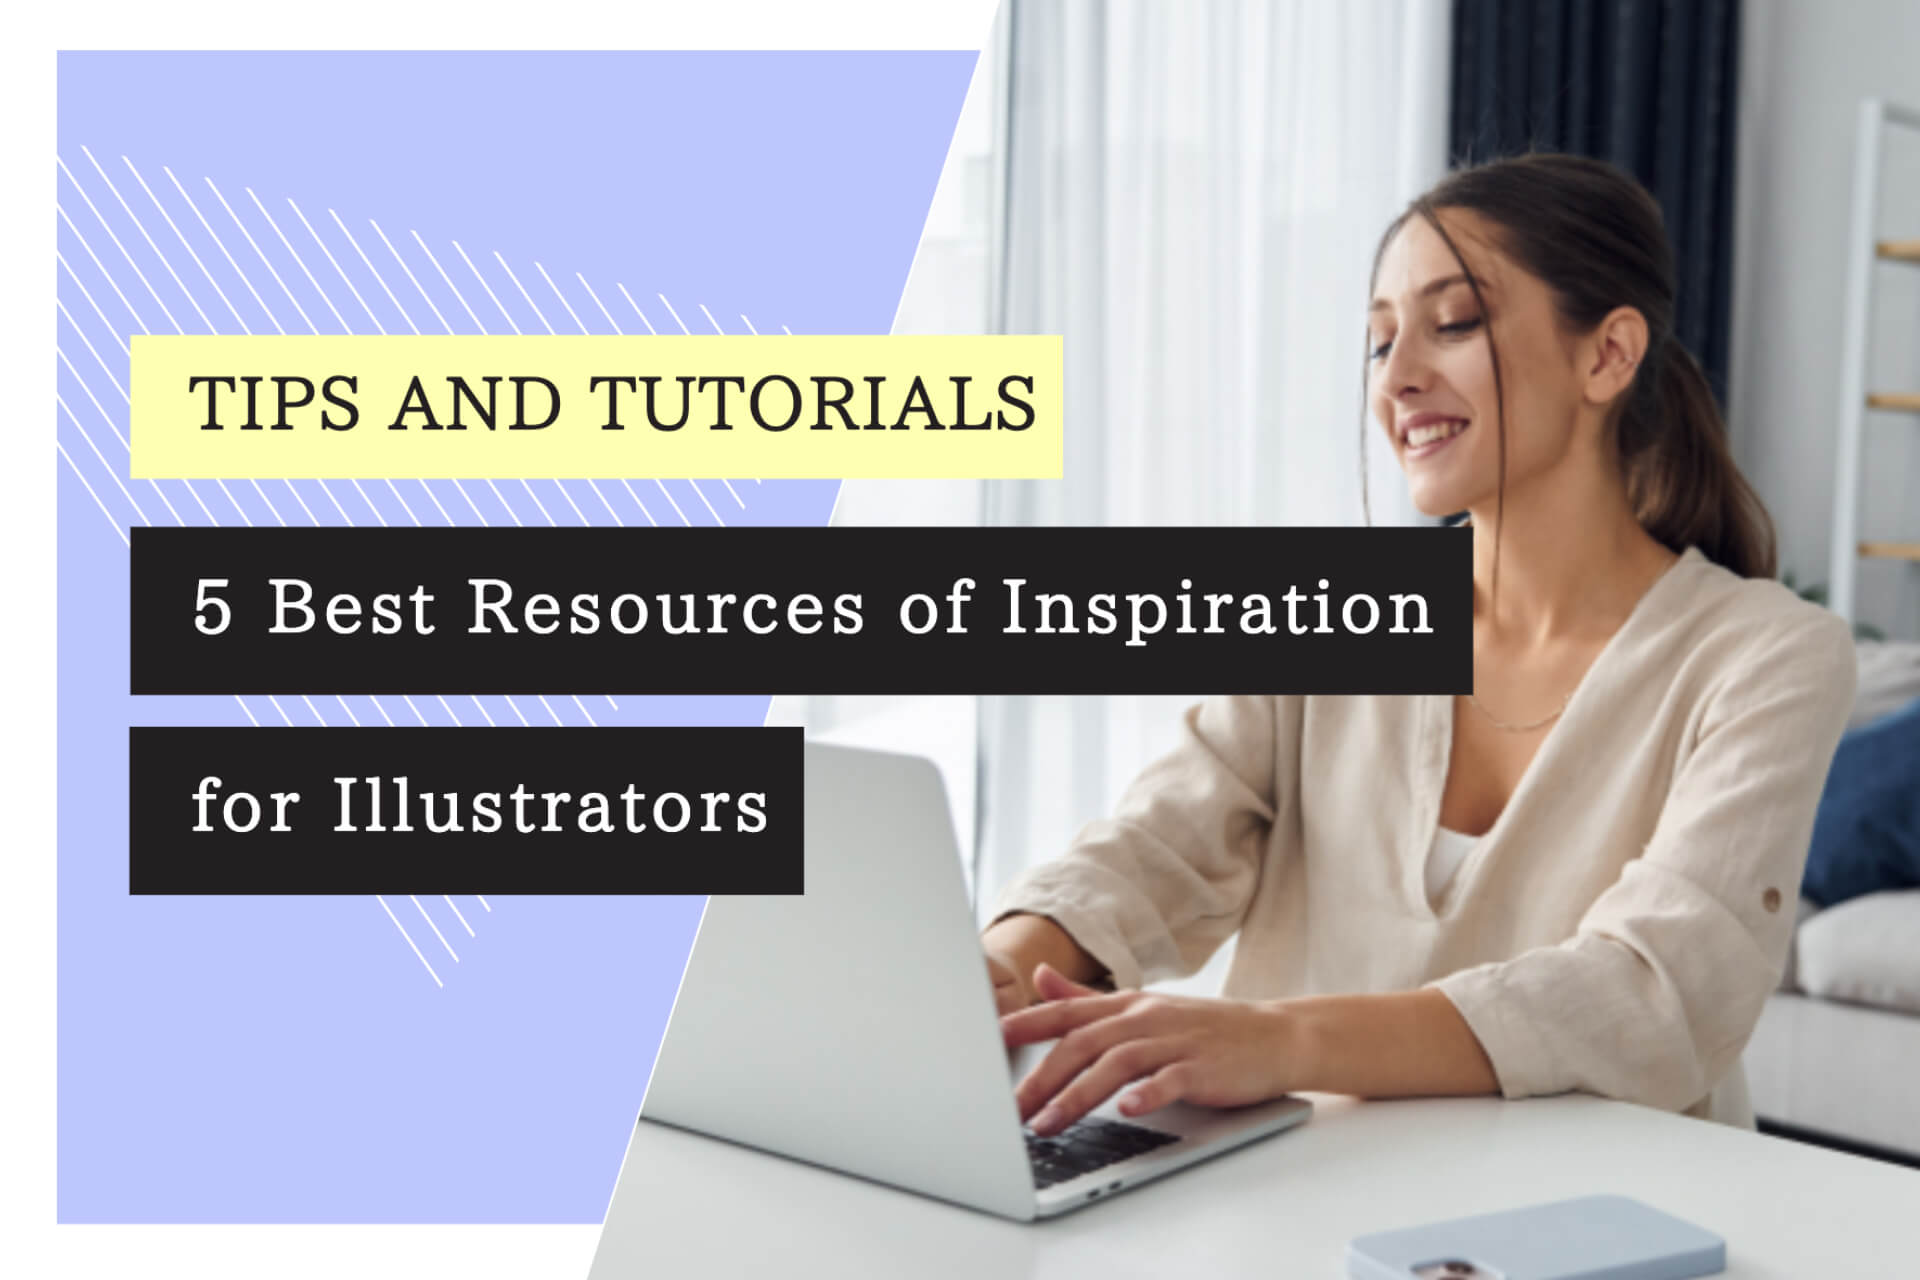 5 Best Resources of Inspiration for Illustrators to Boost Creativity